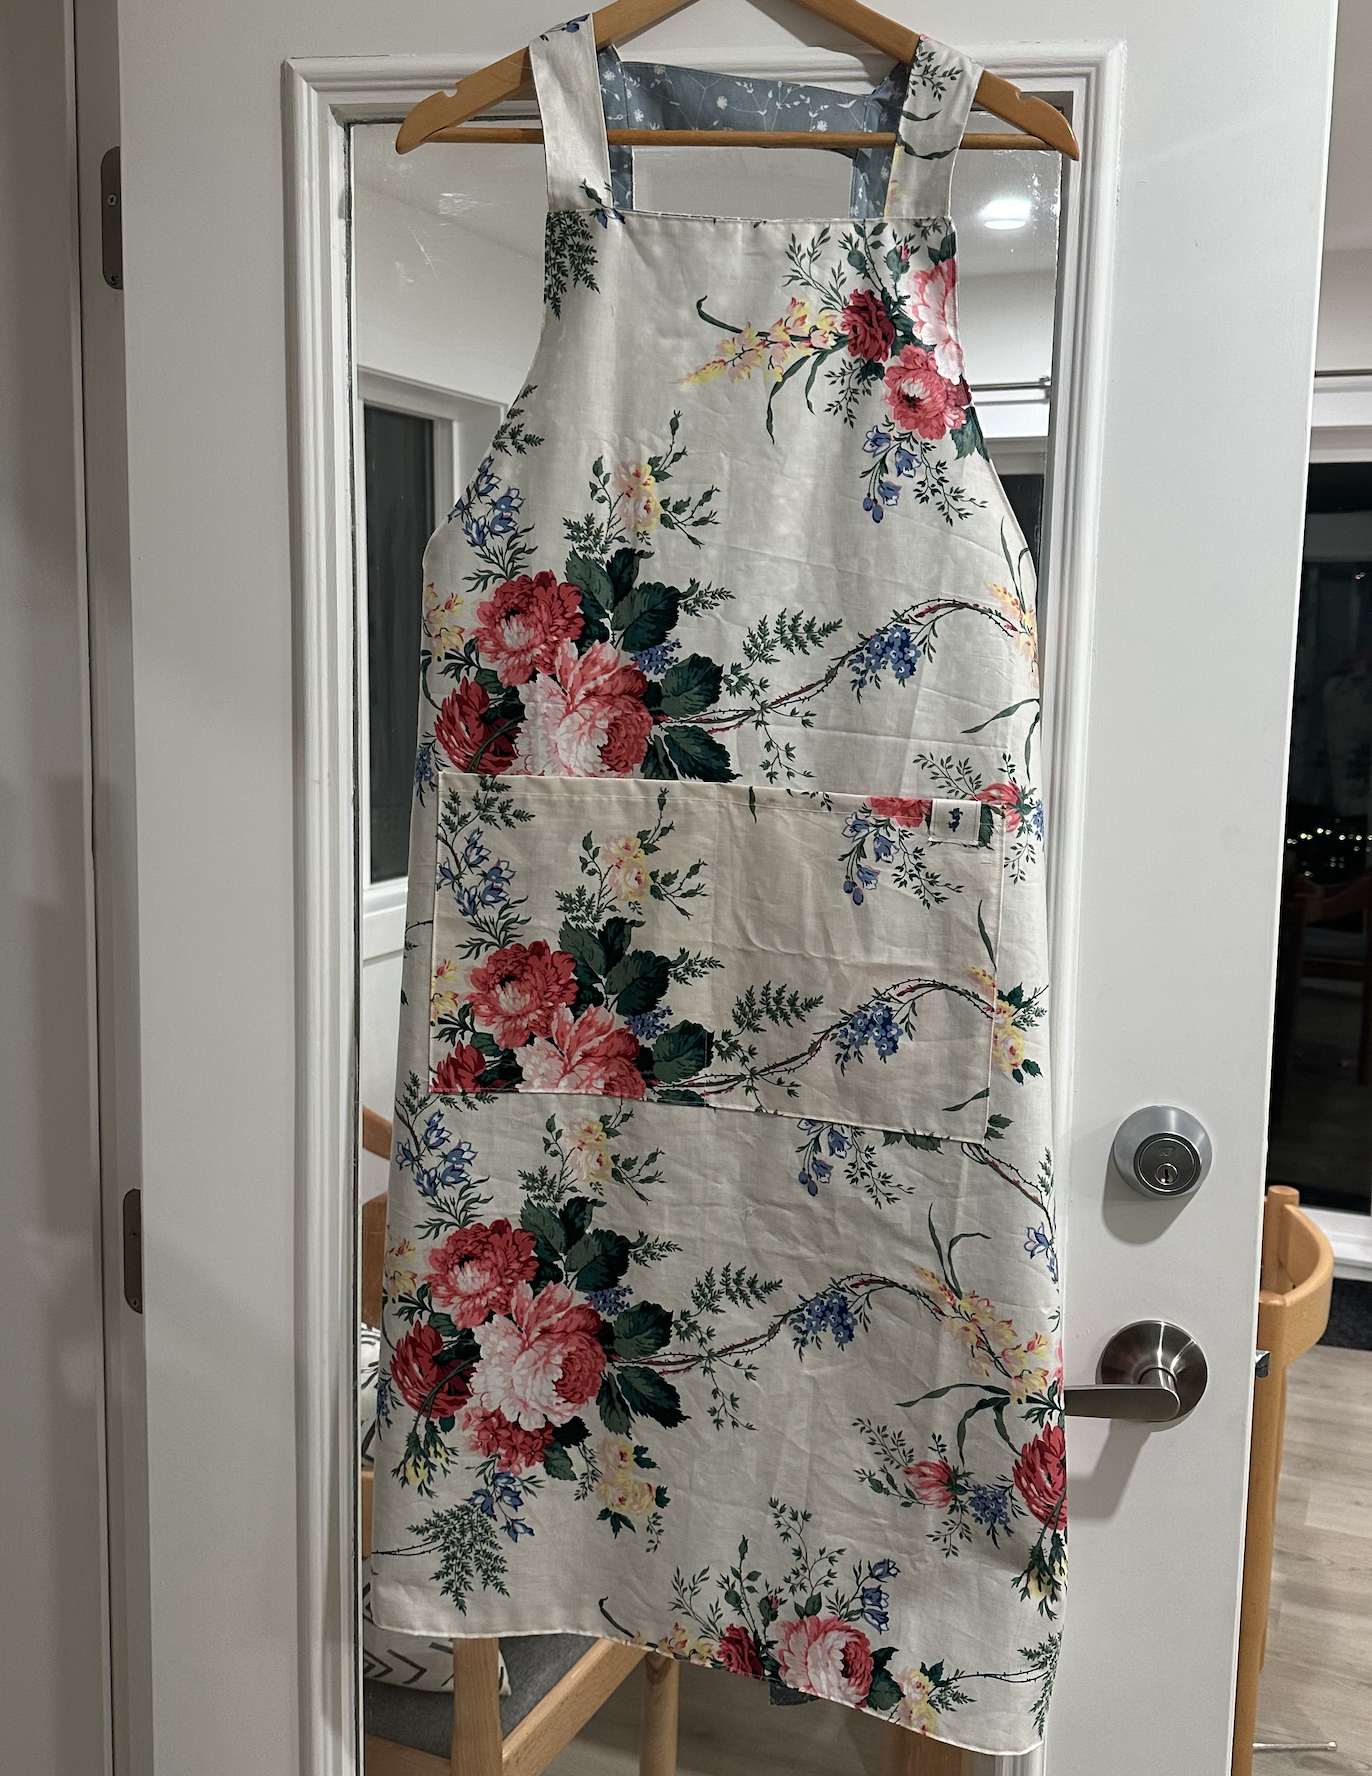 Buy Reversible Kitchen and Utility Aprons Online With Dual Pockets Sustainably Handmade With Vintage Fabric Shop Locally in Fraser Valley British Columbia Canada 74320